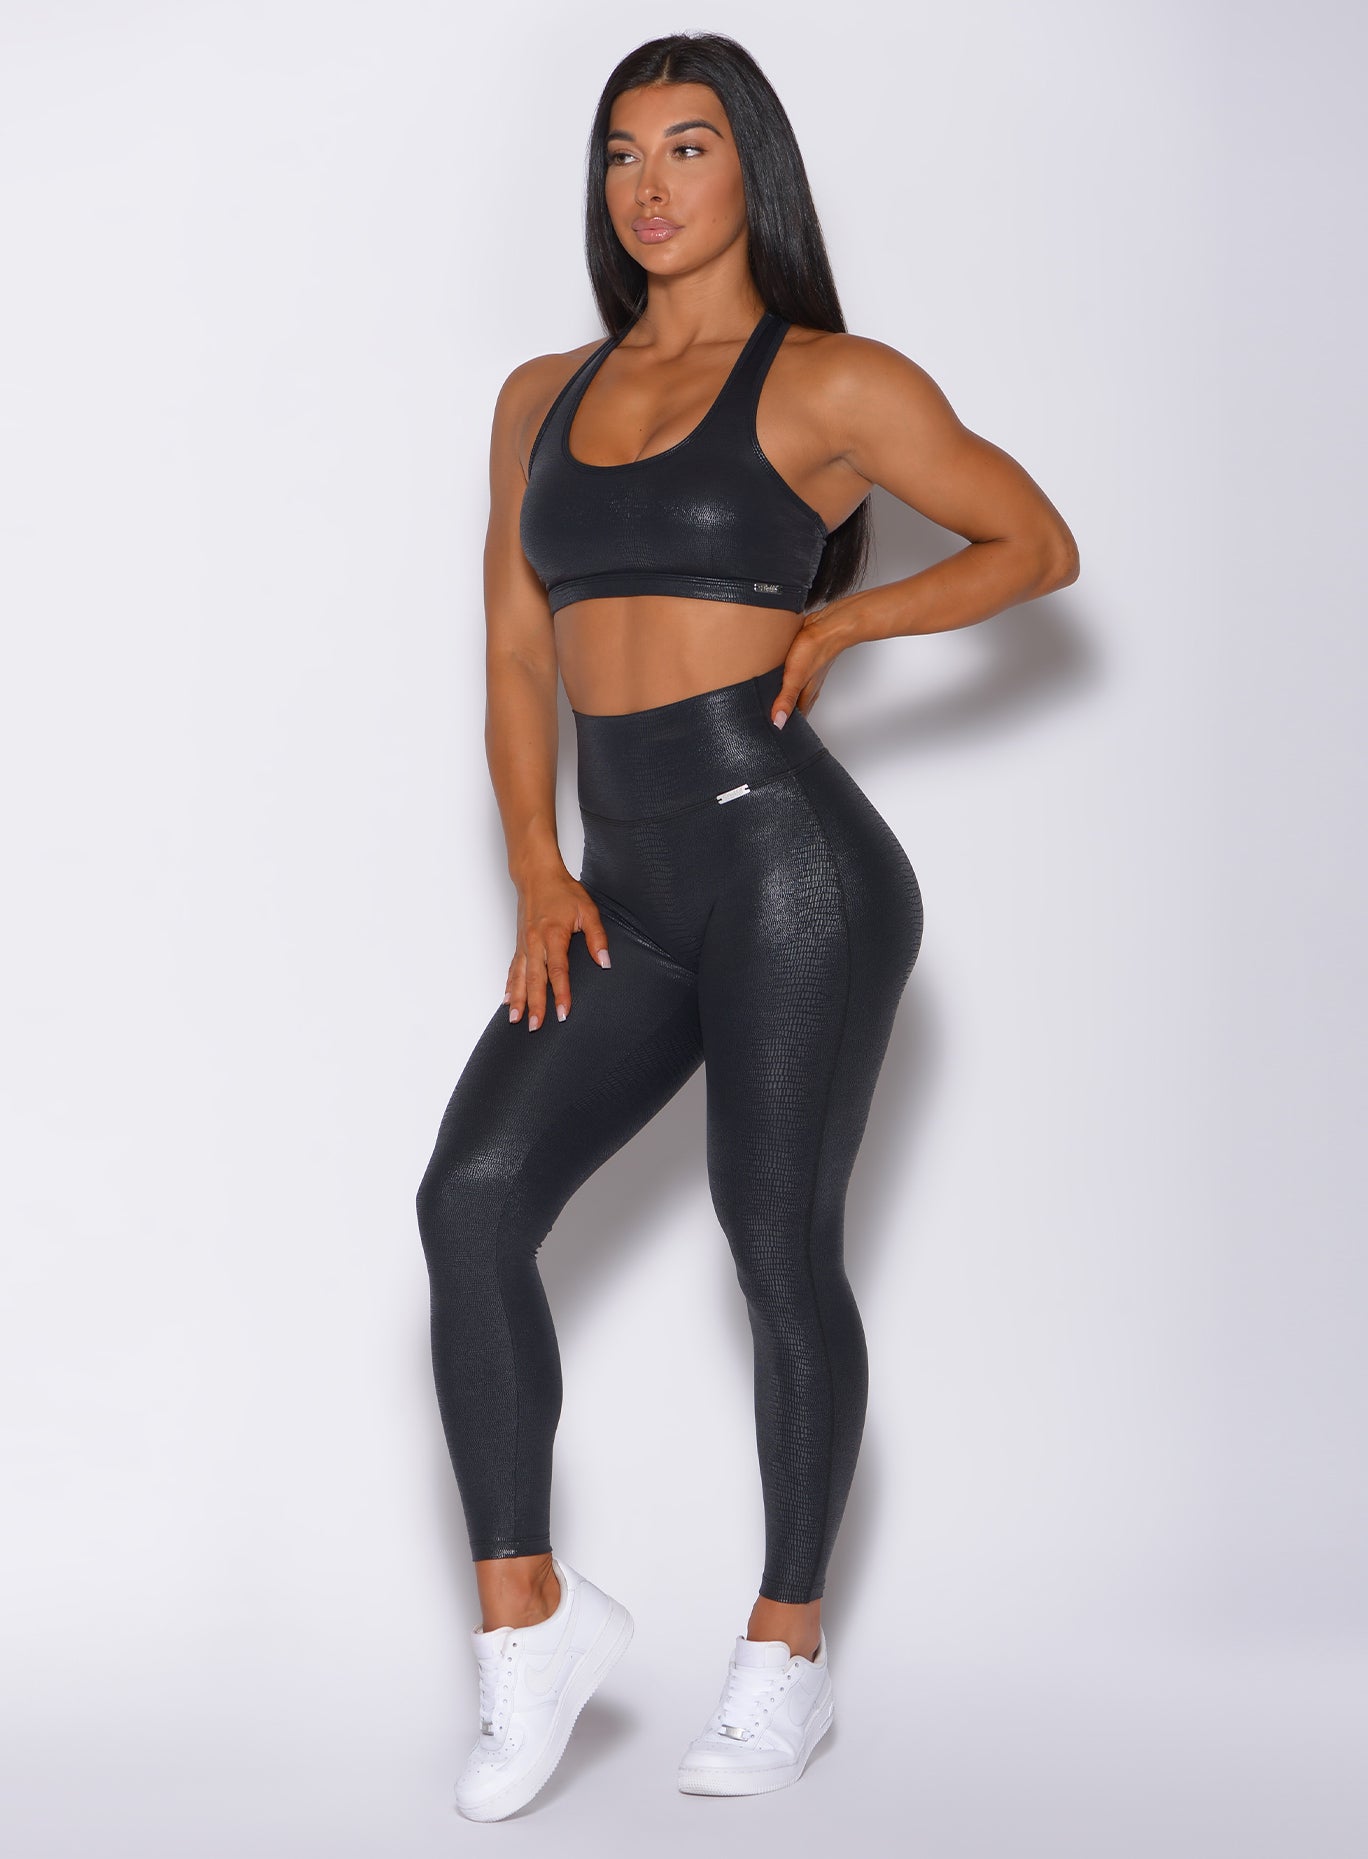 Left side profile view of a model  angled left wearing our shine leggings in black python color and a matching sports bra